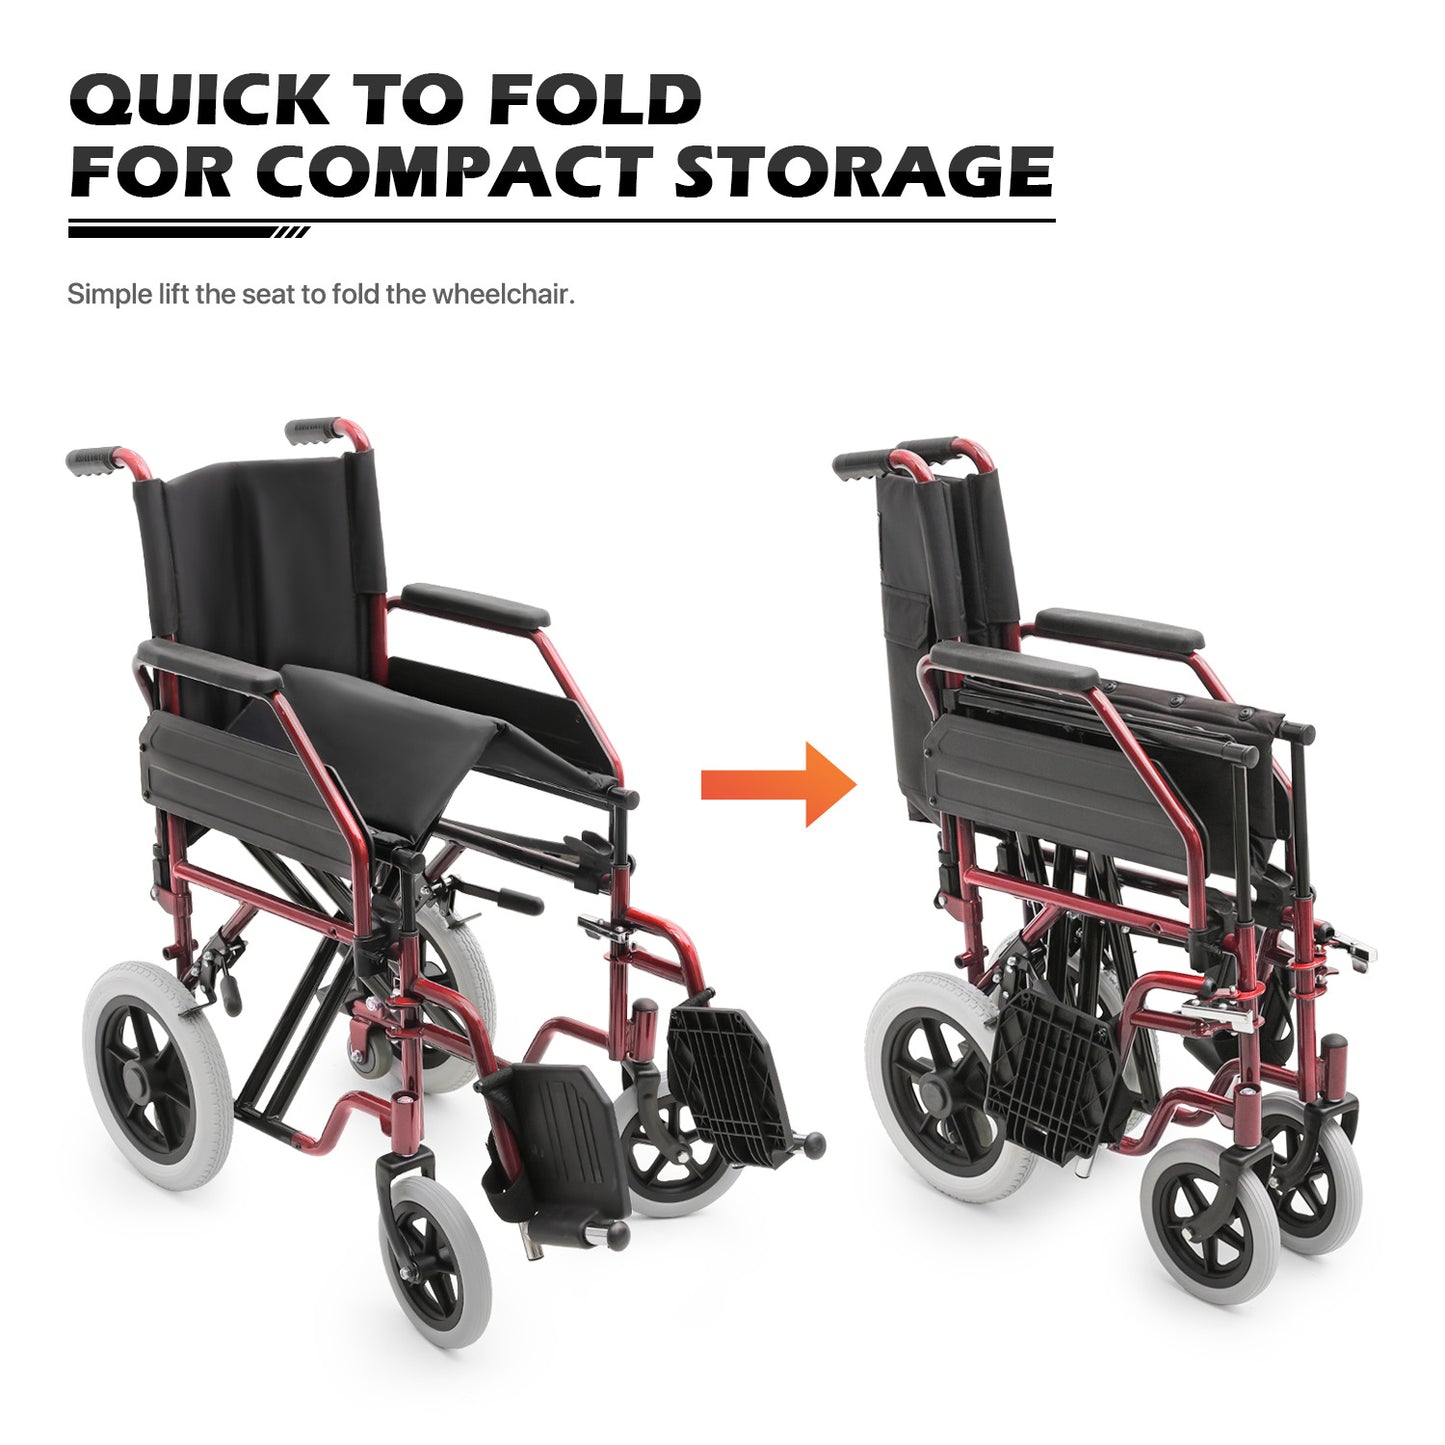 Transport Wheelchair - PU Solid Tyre - Red